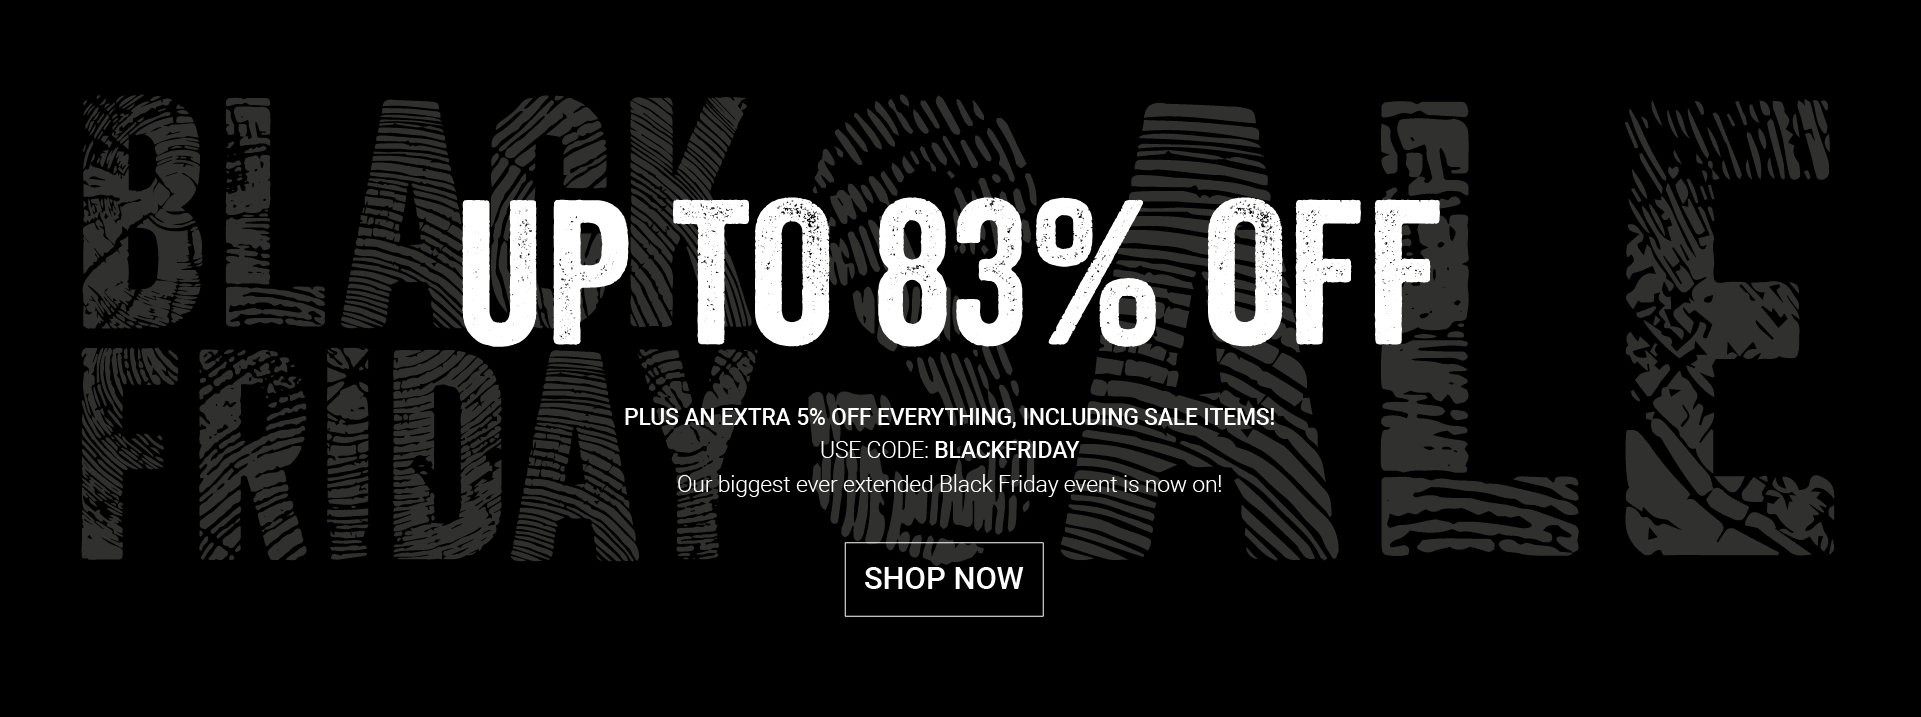 Up to 83% off